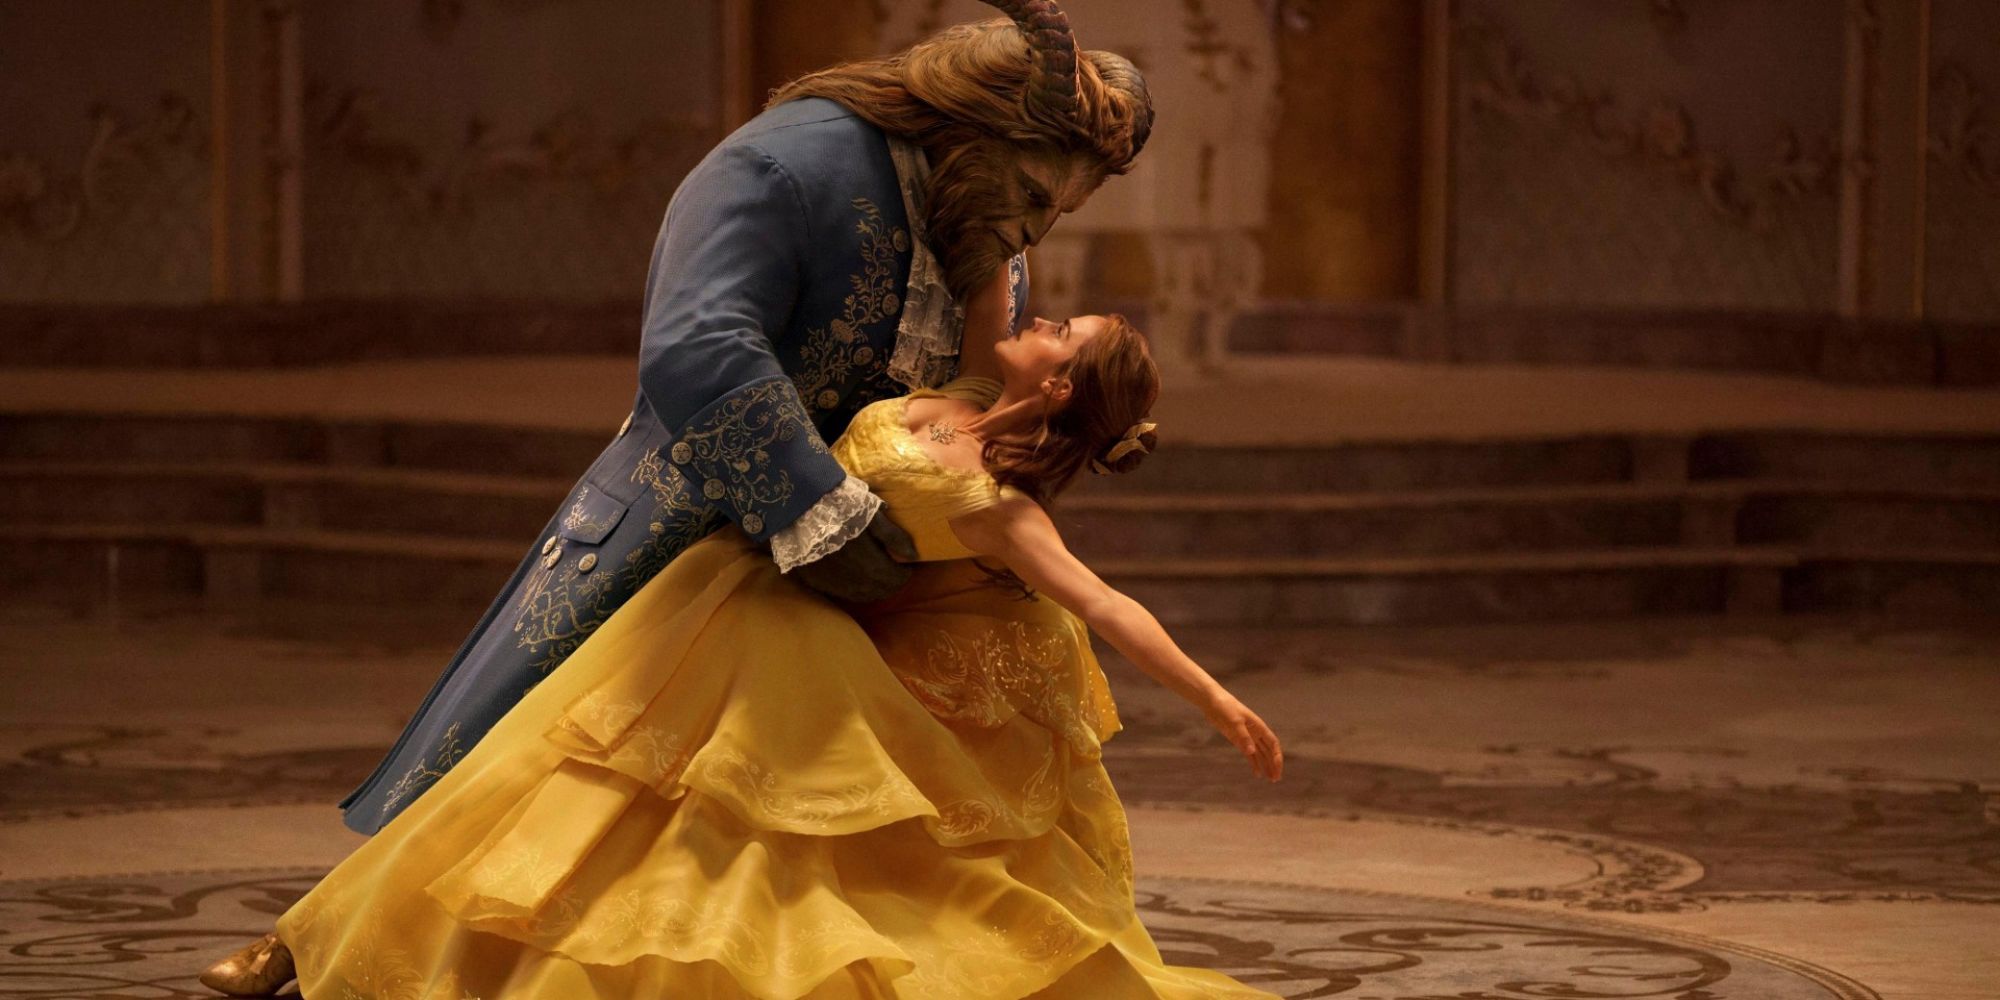 Belle and the Beast dance in a ballroom